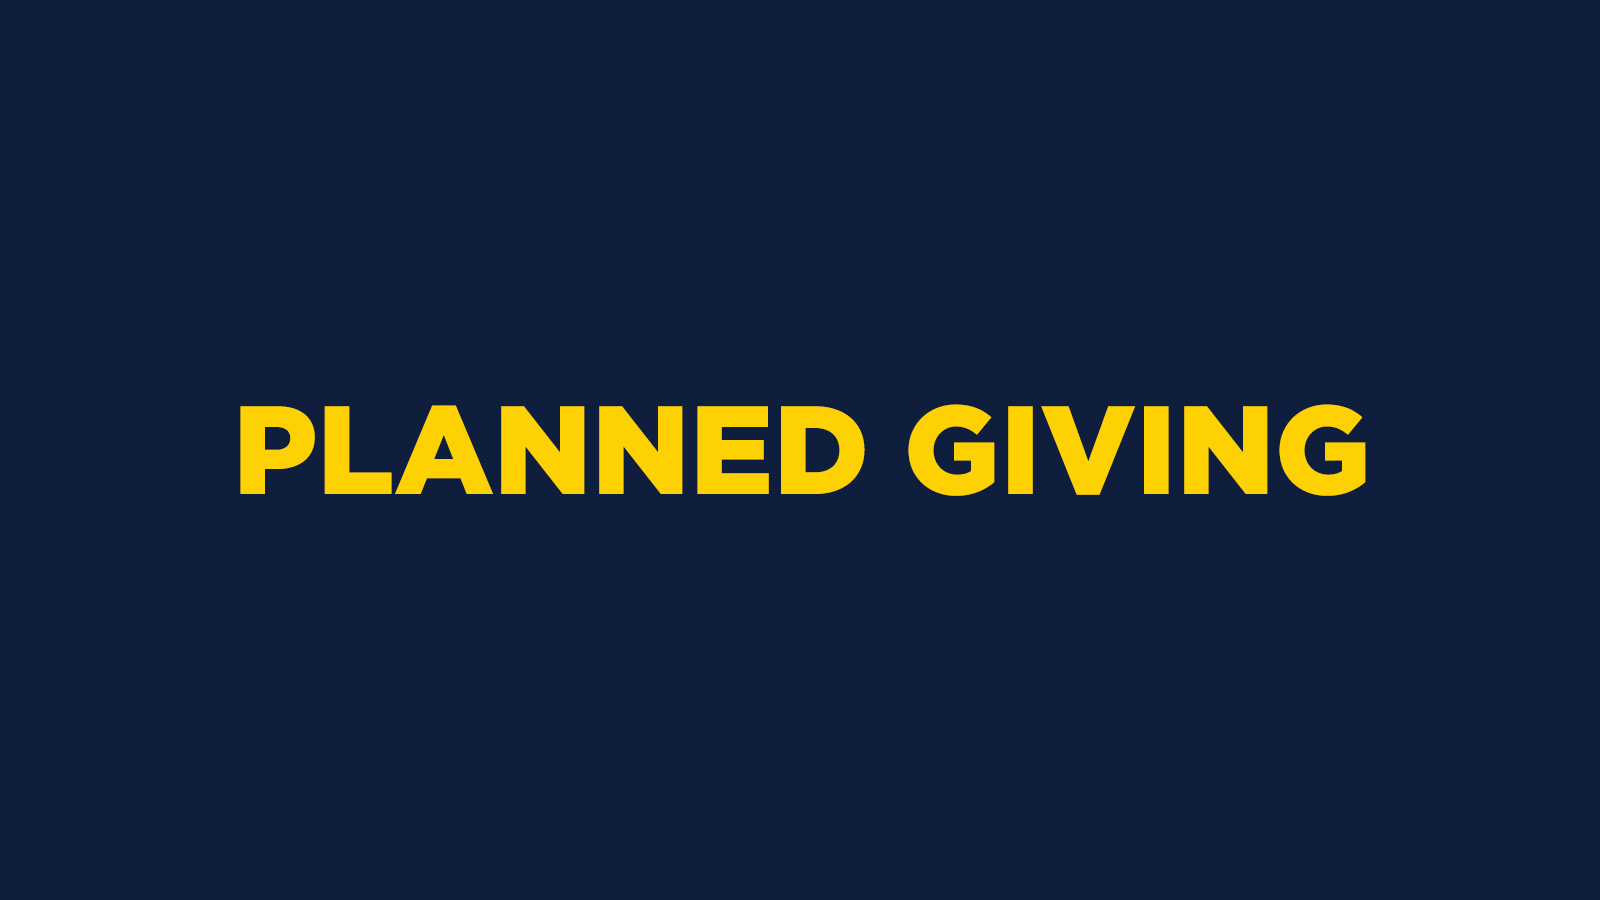 PLANNED GIVING